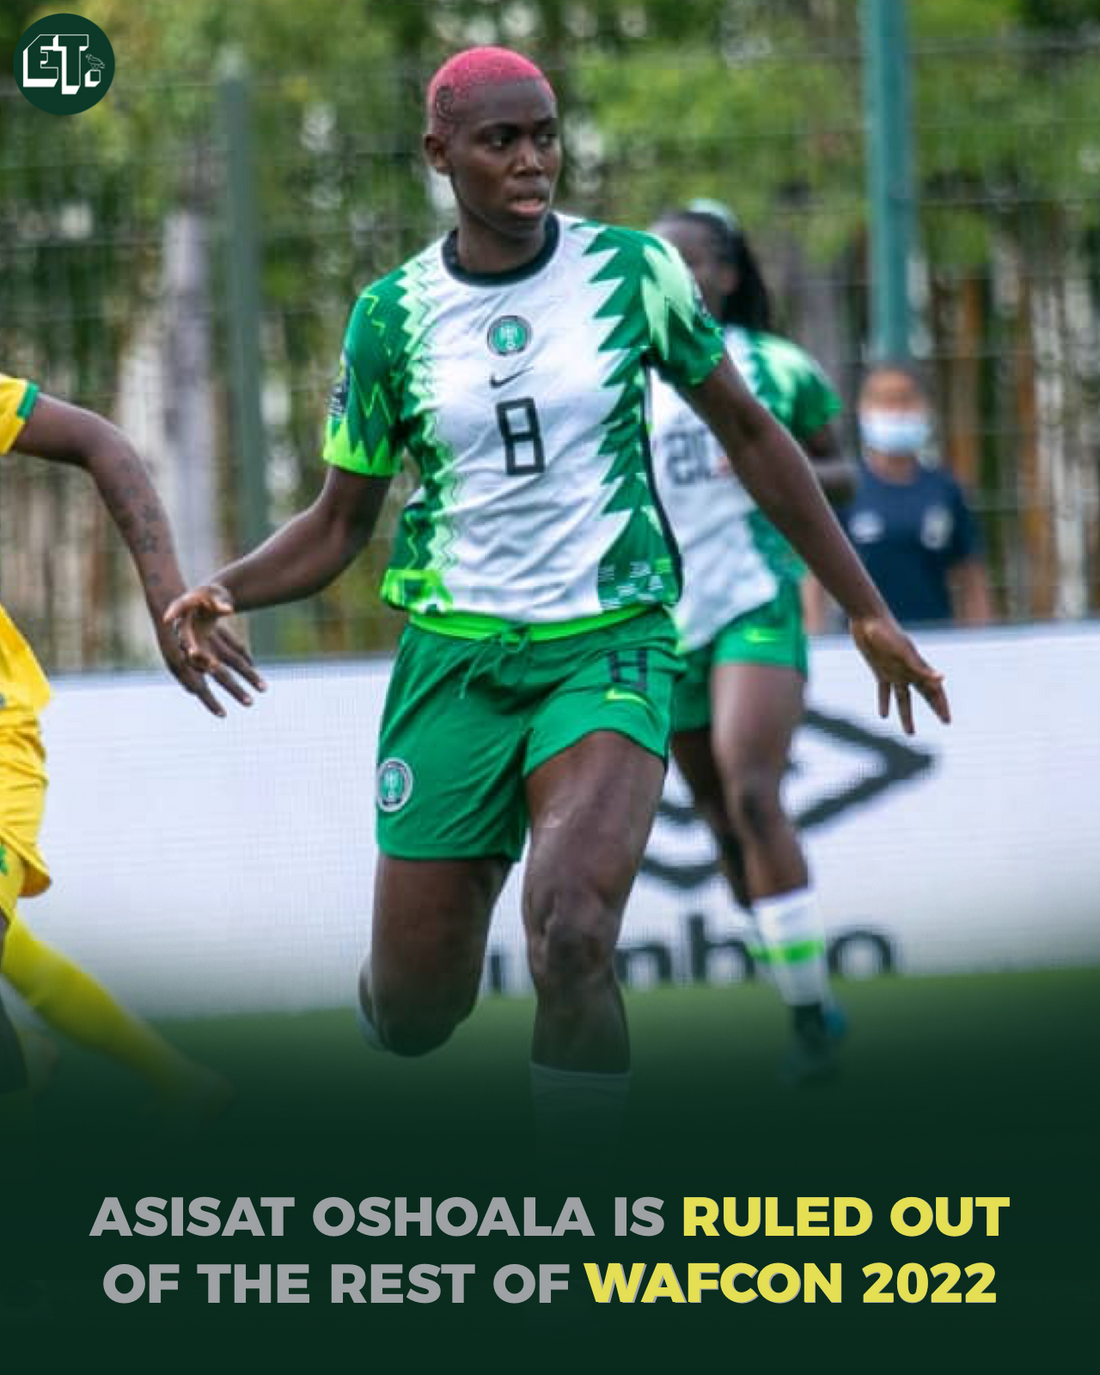 WAFCON 2022: Asisat Oshoala out for six weeks